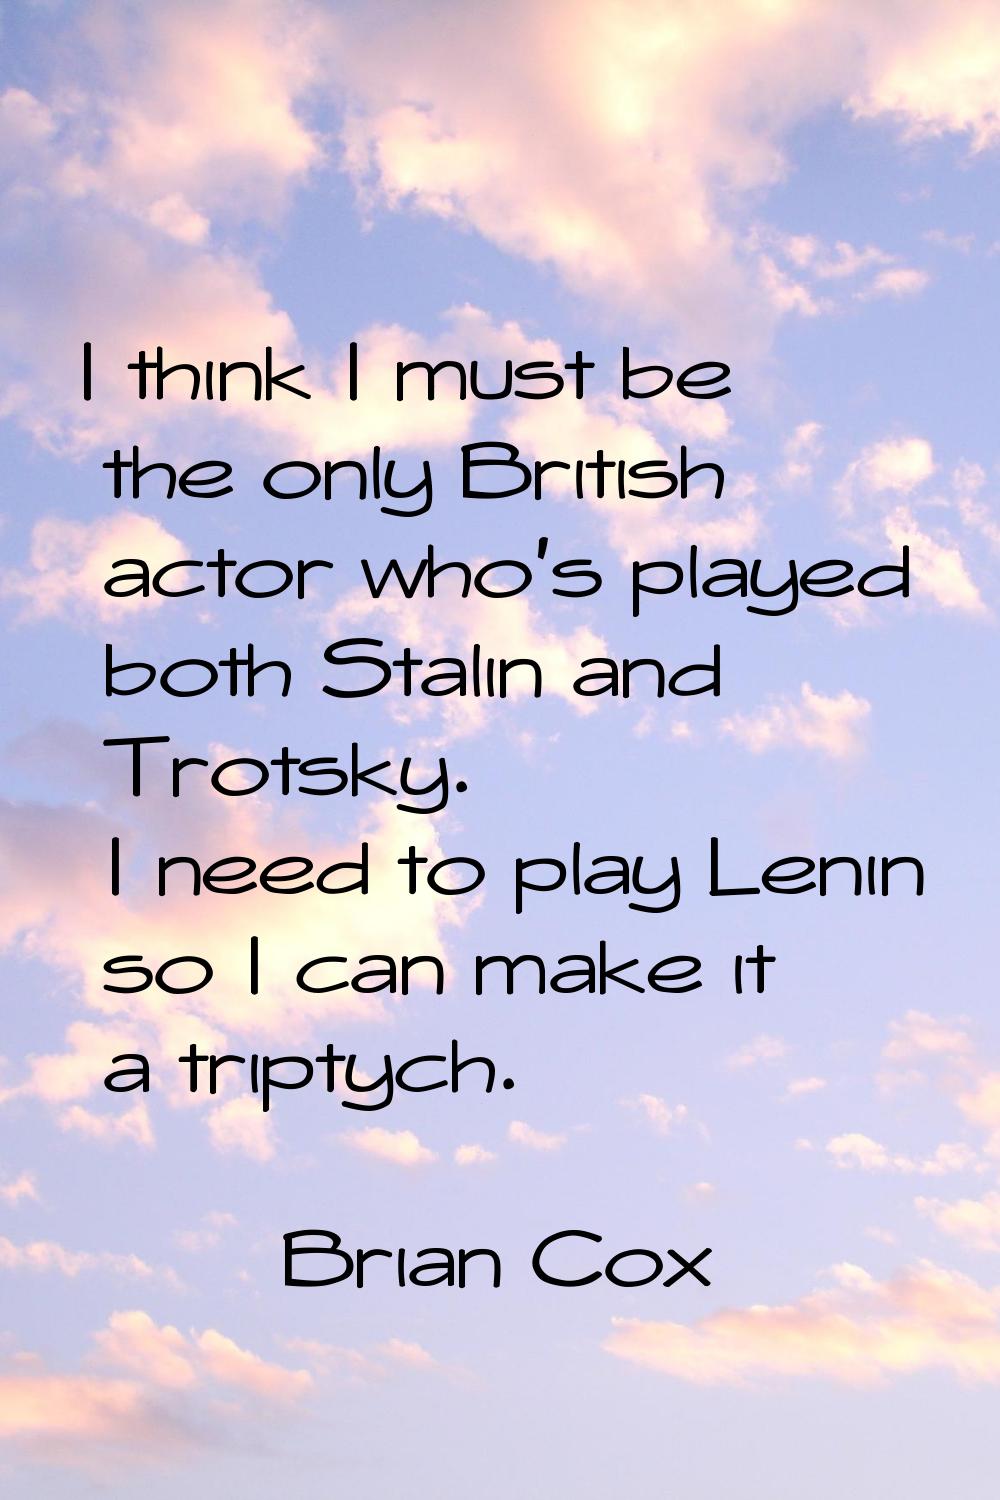 I think I must be the only British actor who's played both Stalin and Trotsky. I need to play Lenin